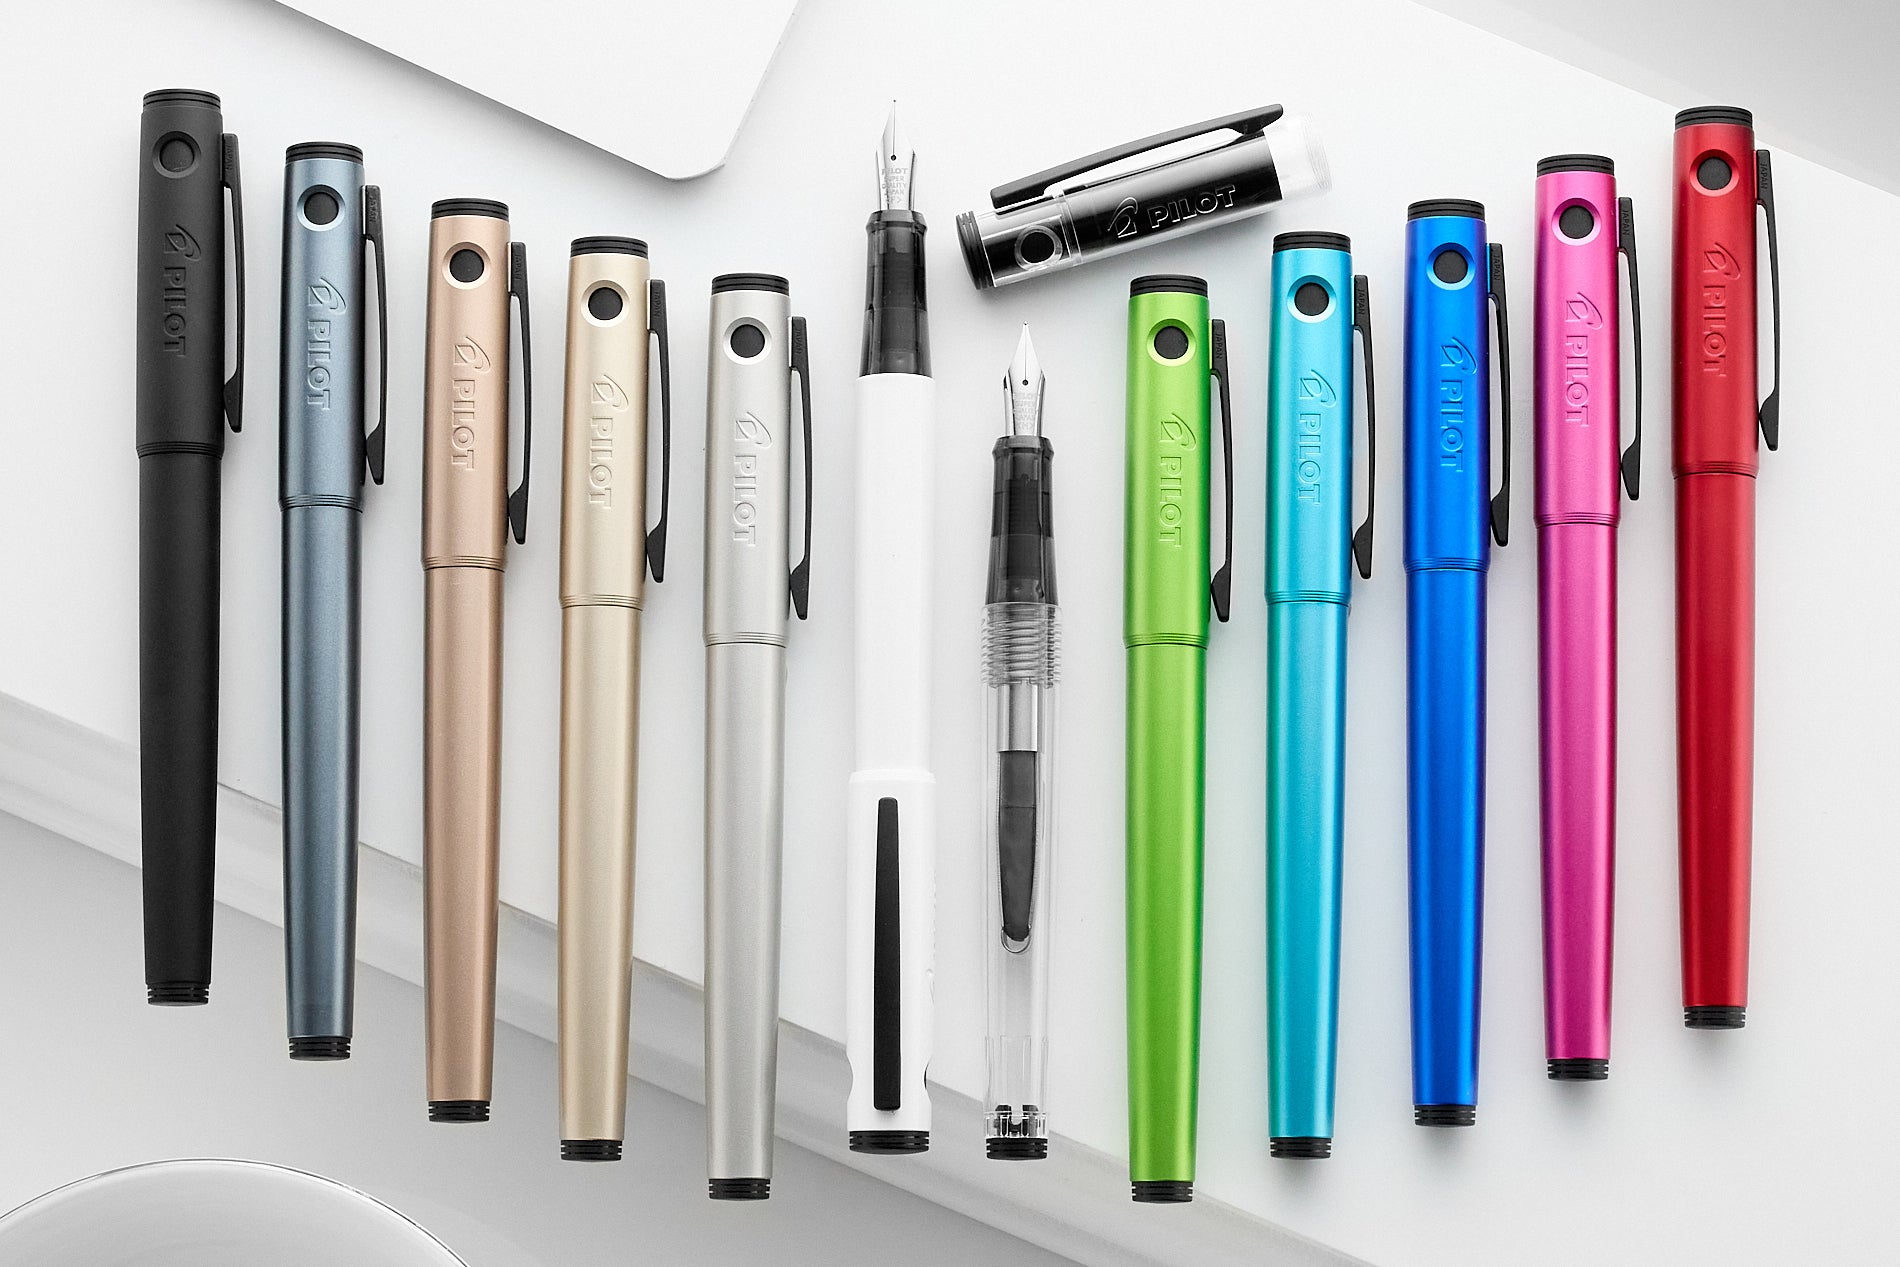 Assorted Pilot Explorer fountain pens in a wide variety of colors on a white background